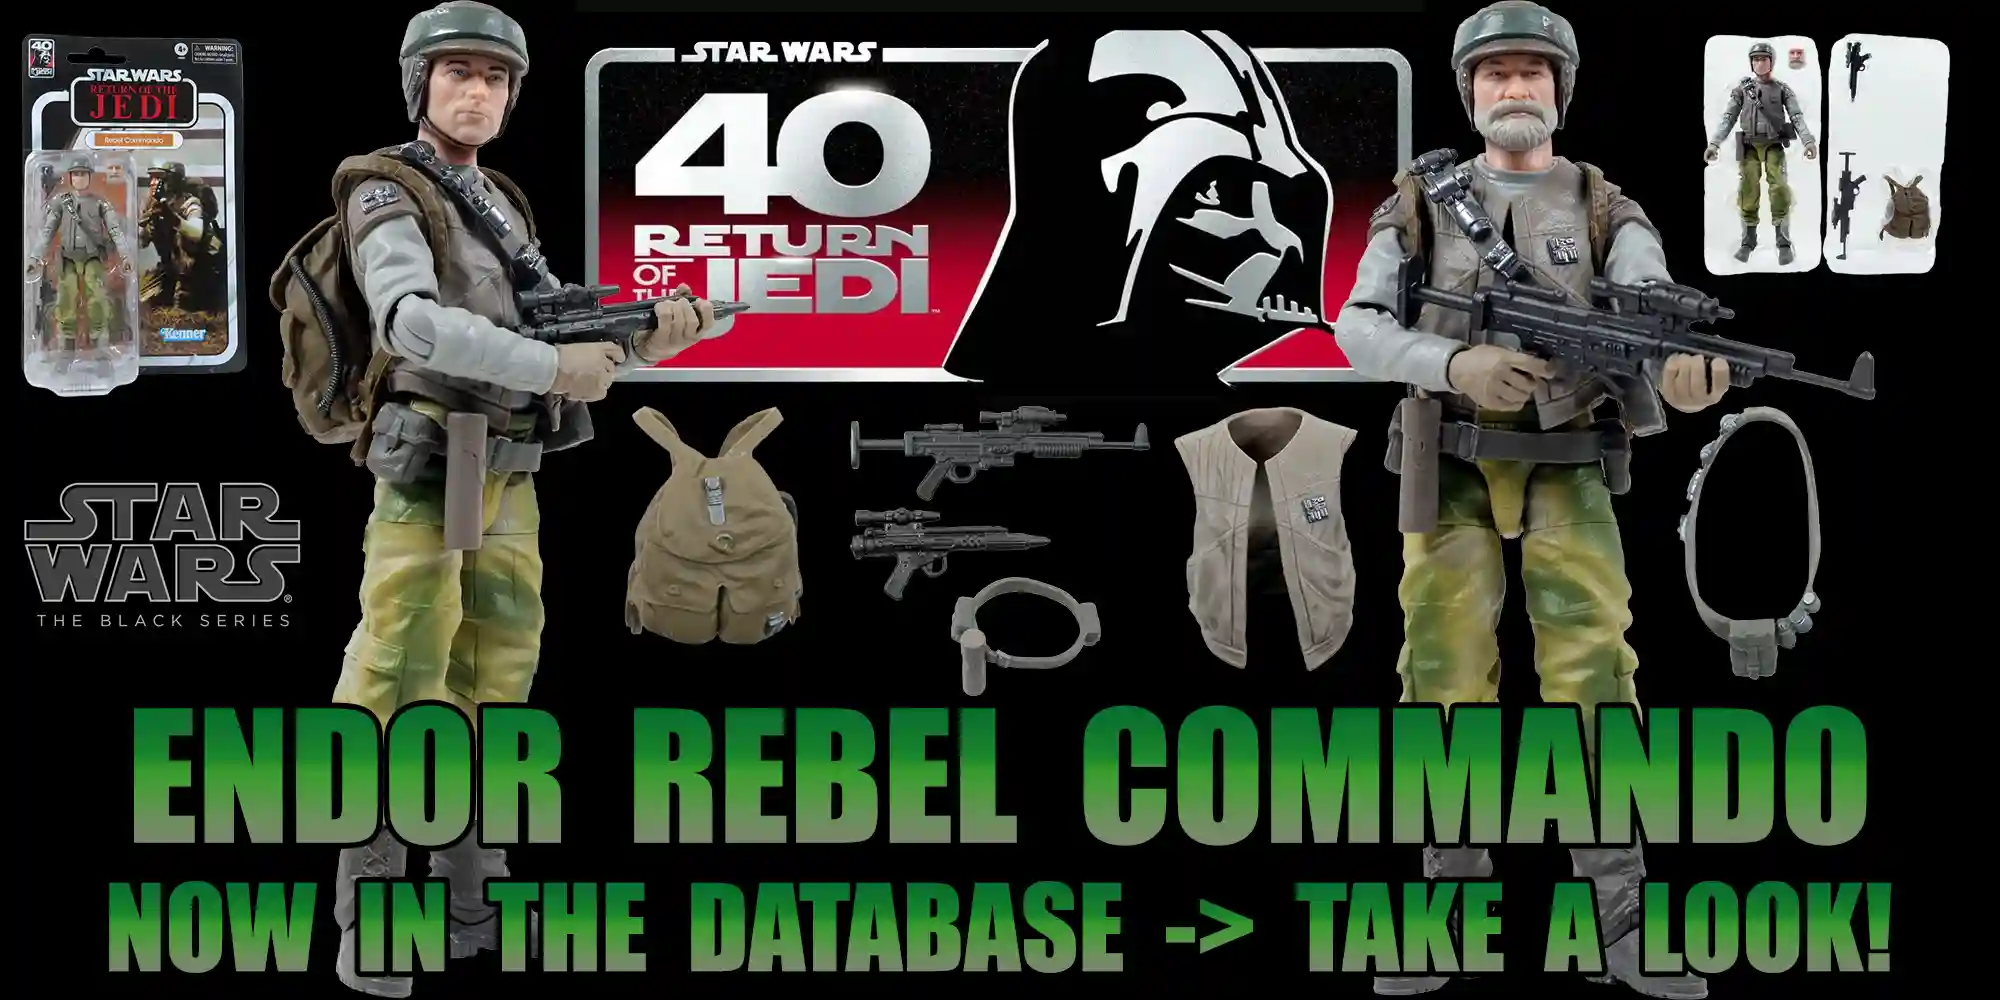 Learn More About The Black Series Endor Rebel Commando!